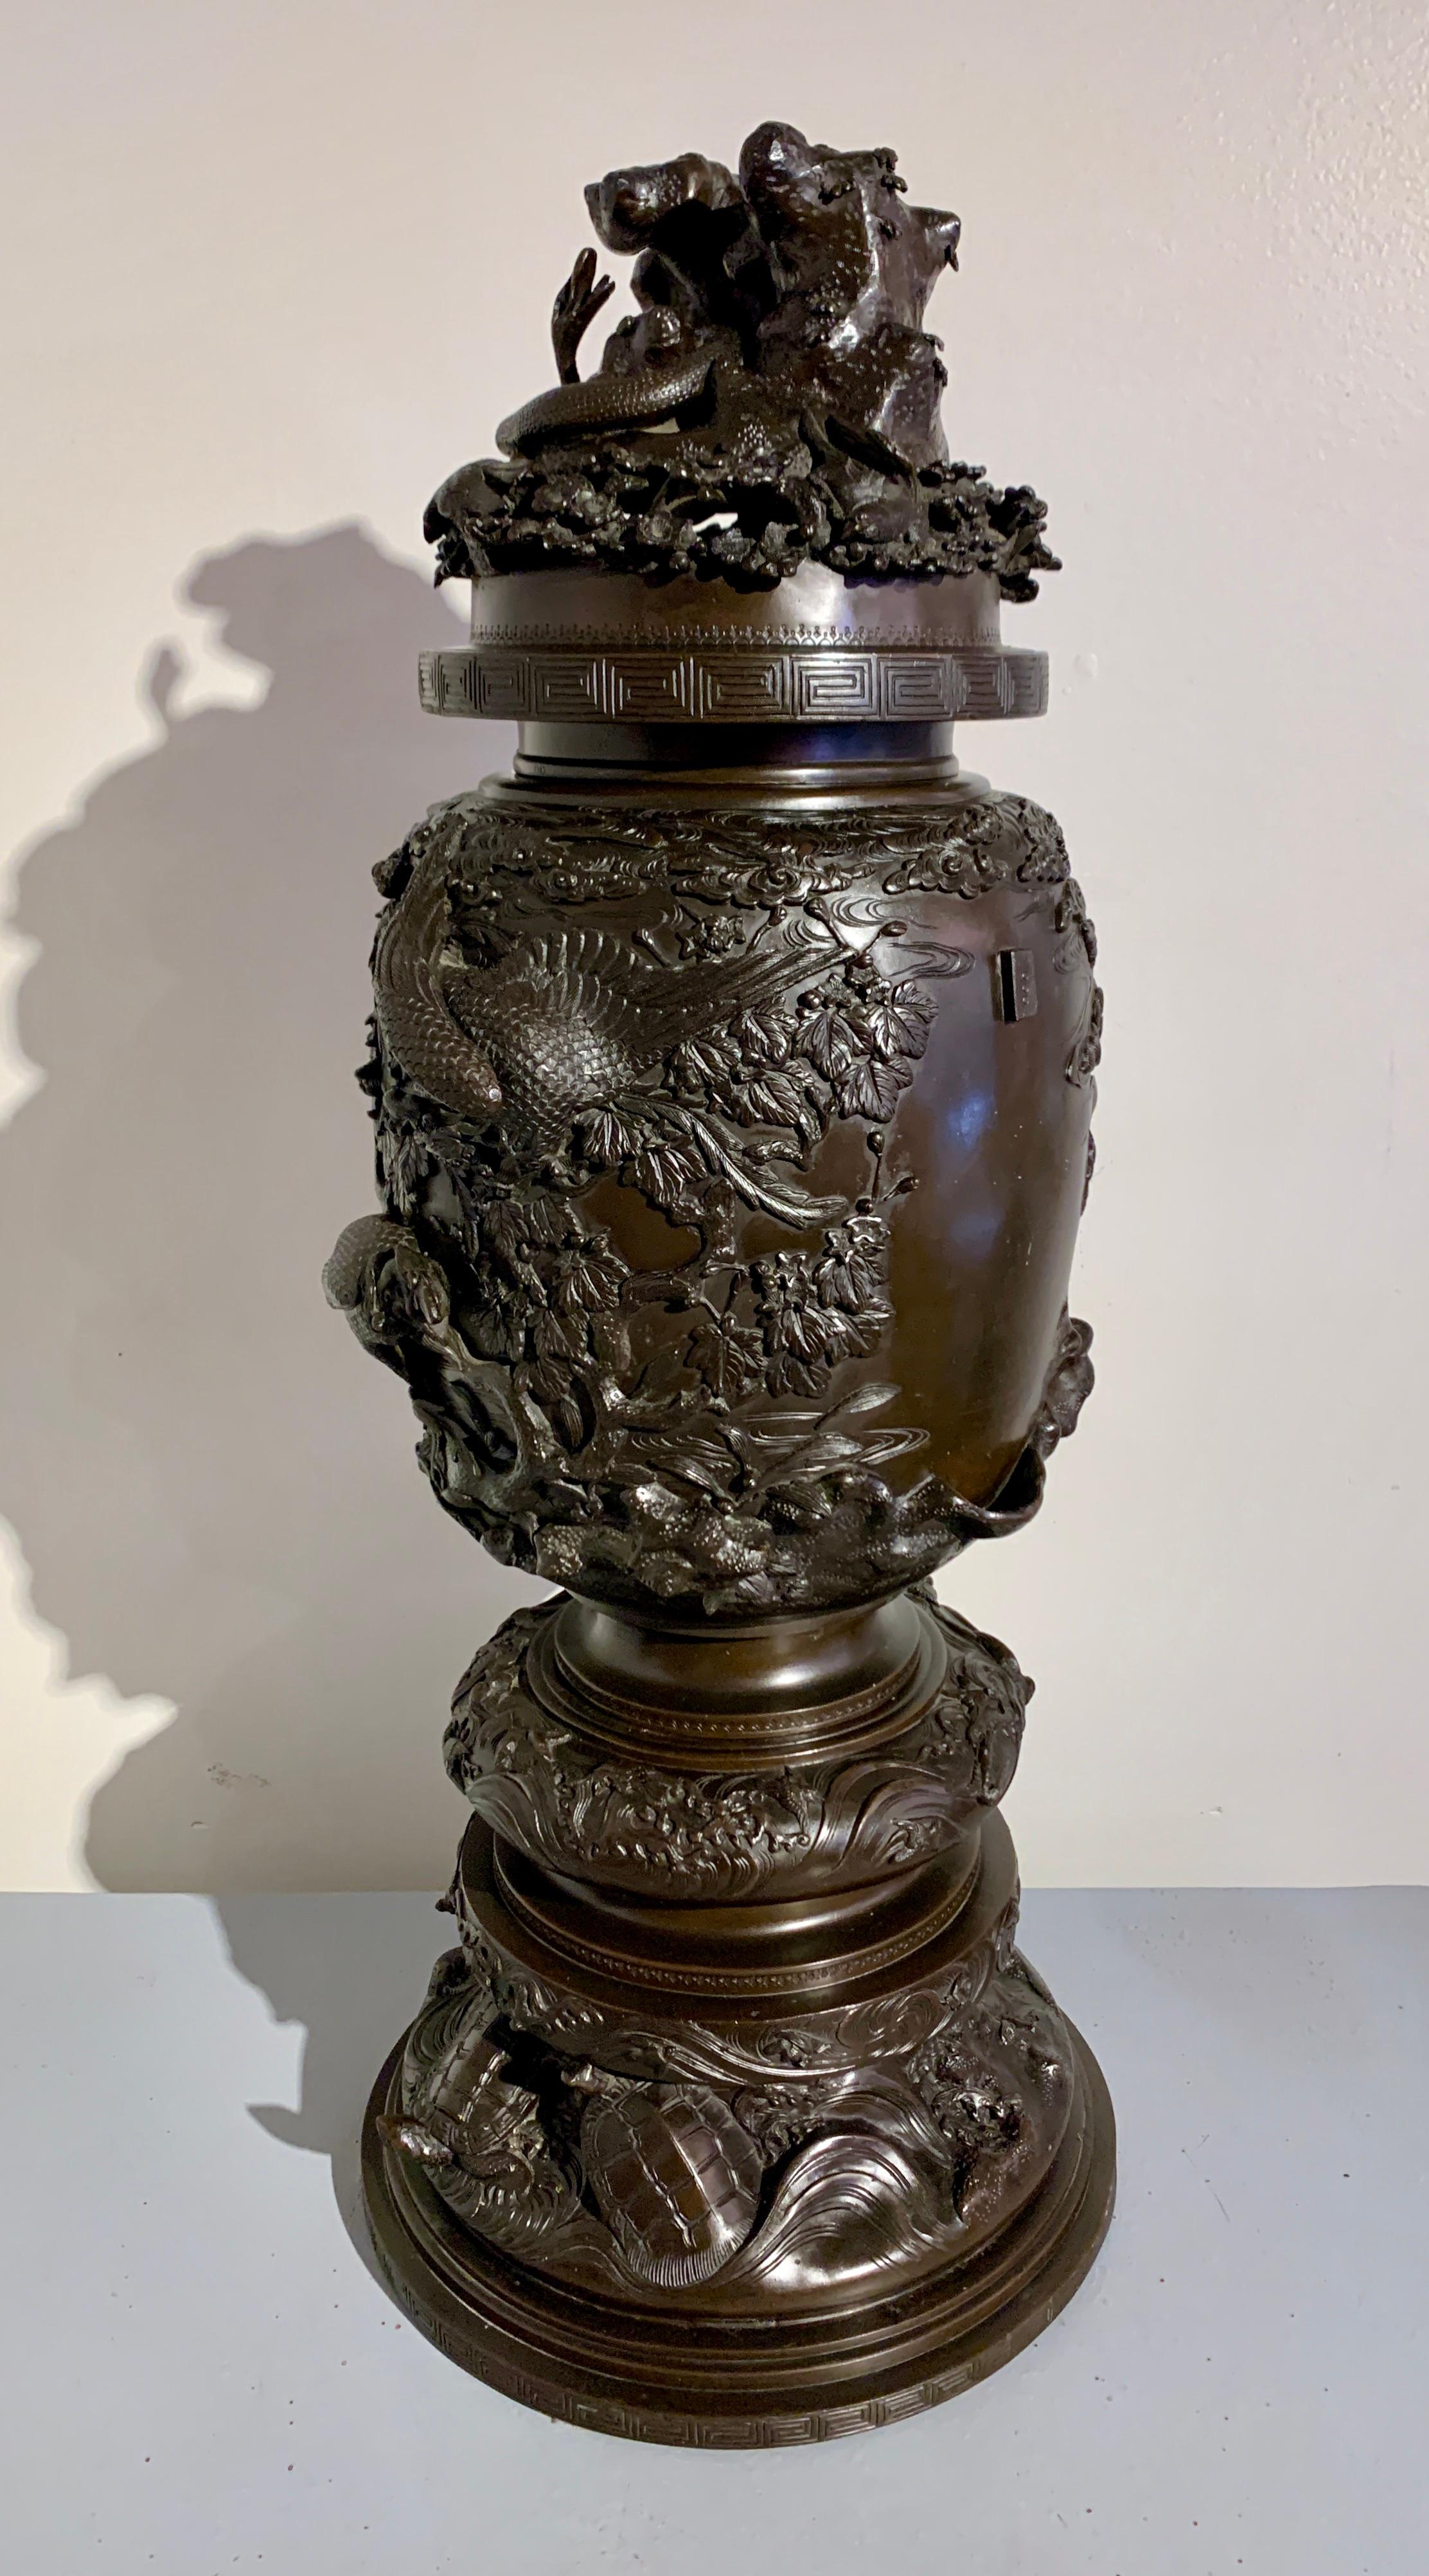 A large and fantastic Japanese cast bronze incense burner, koro, with high relief design, Meiji period, late 19th century, Japan.

The large and tall koro cast in extremely high relief with images of birds, trees, water and turtles. 
The censer